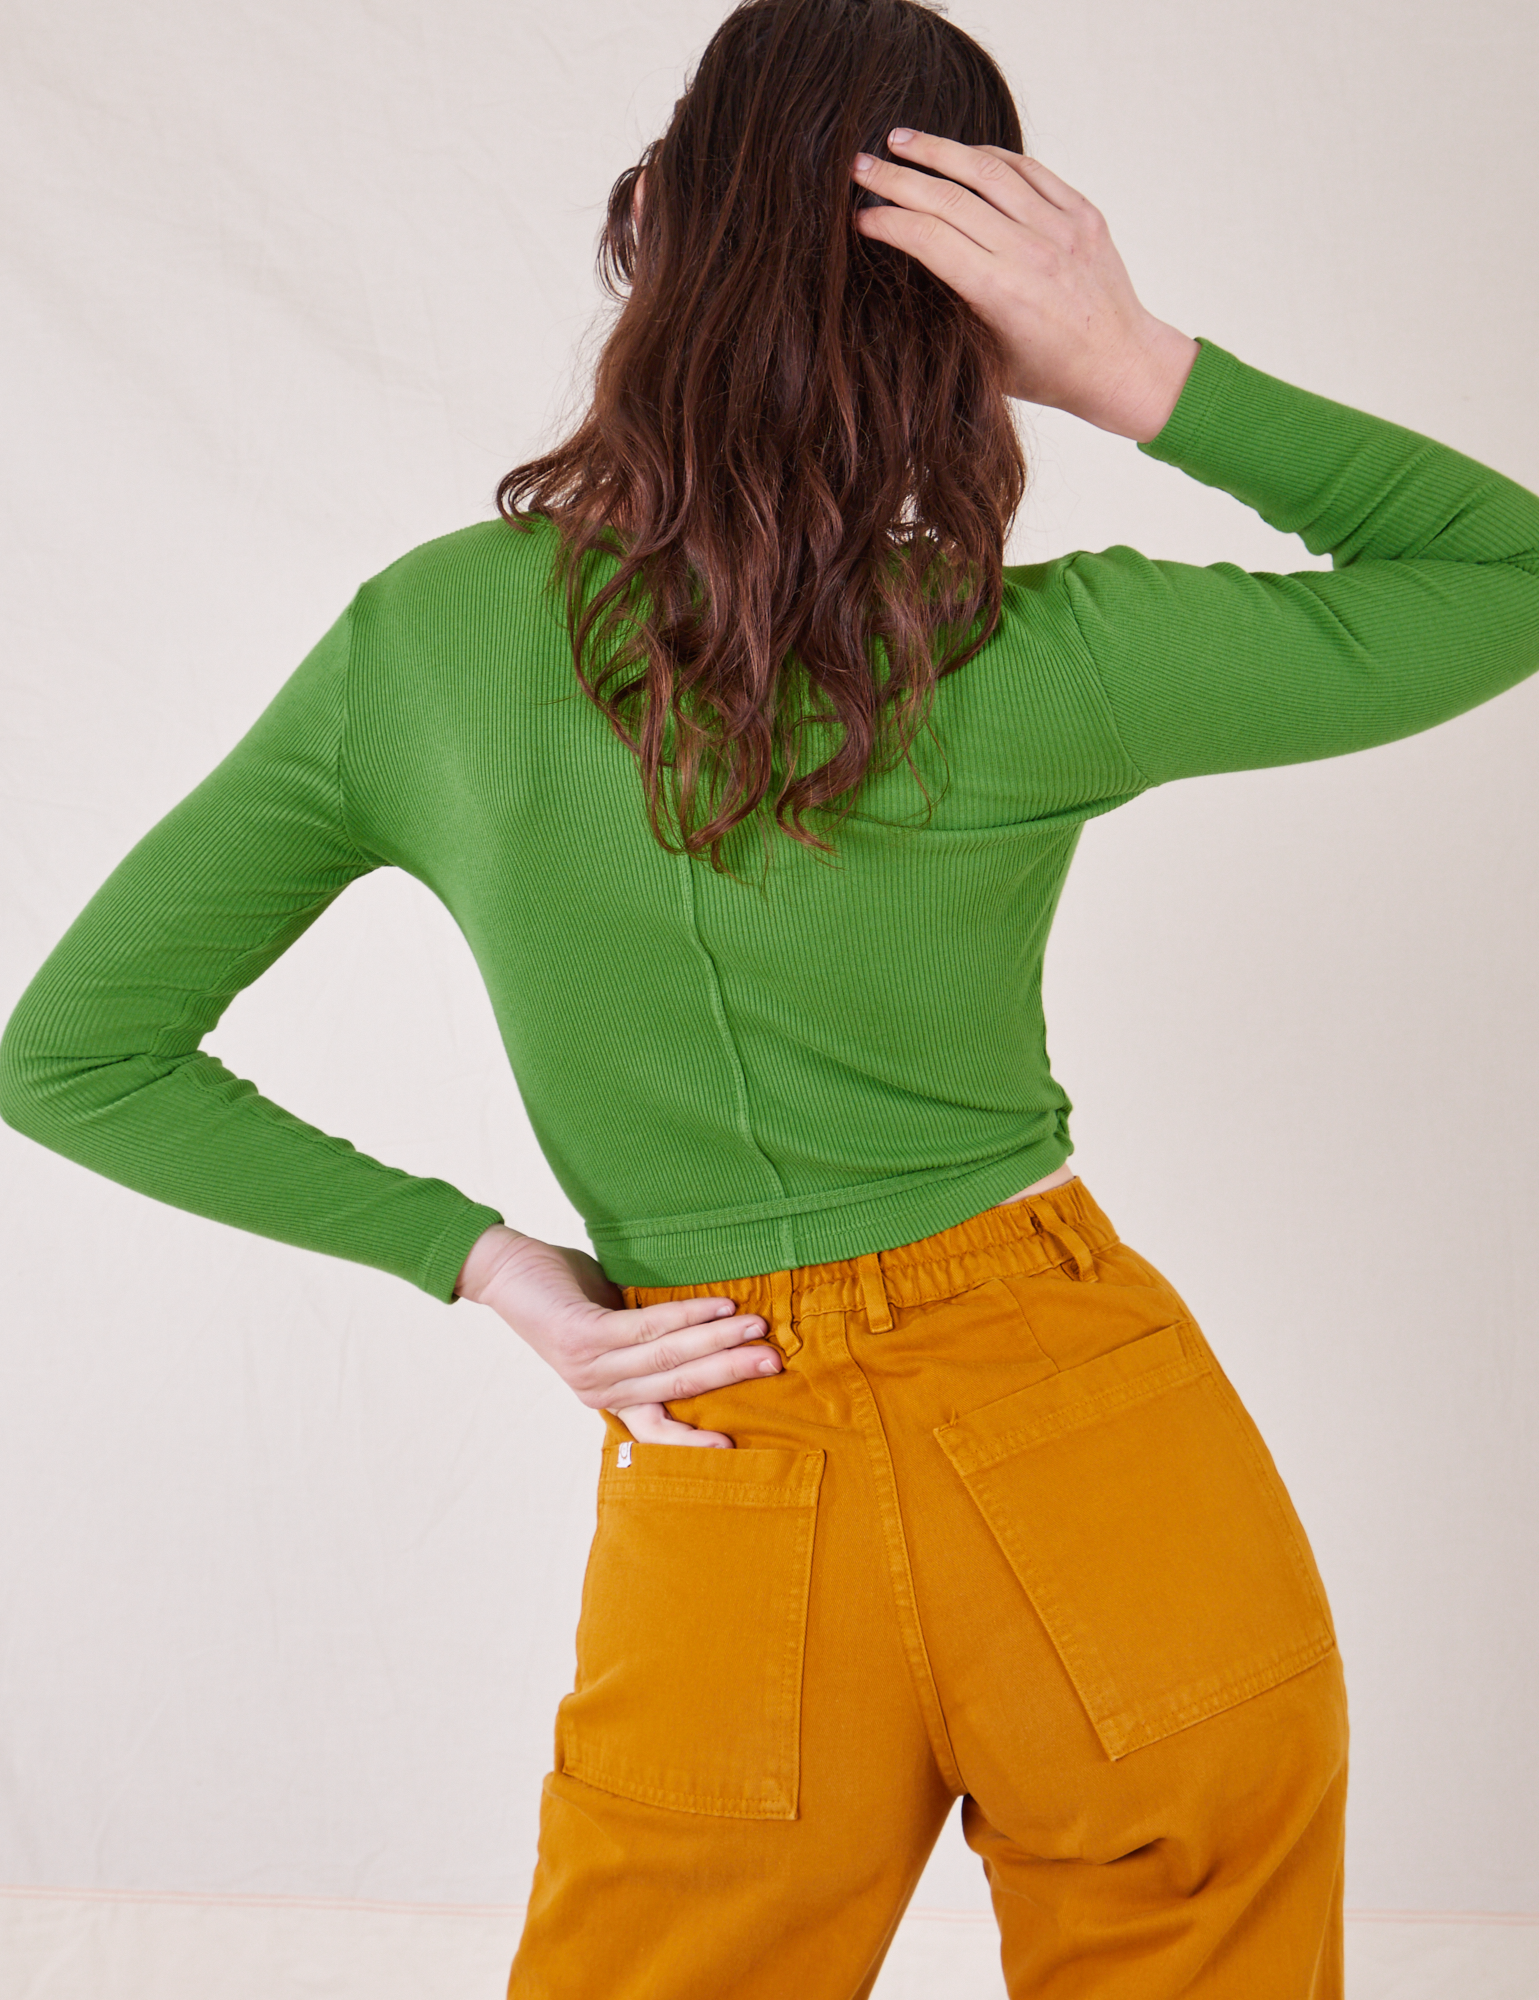 Wrap Top in Bright Olive back view on Alex